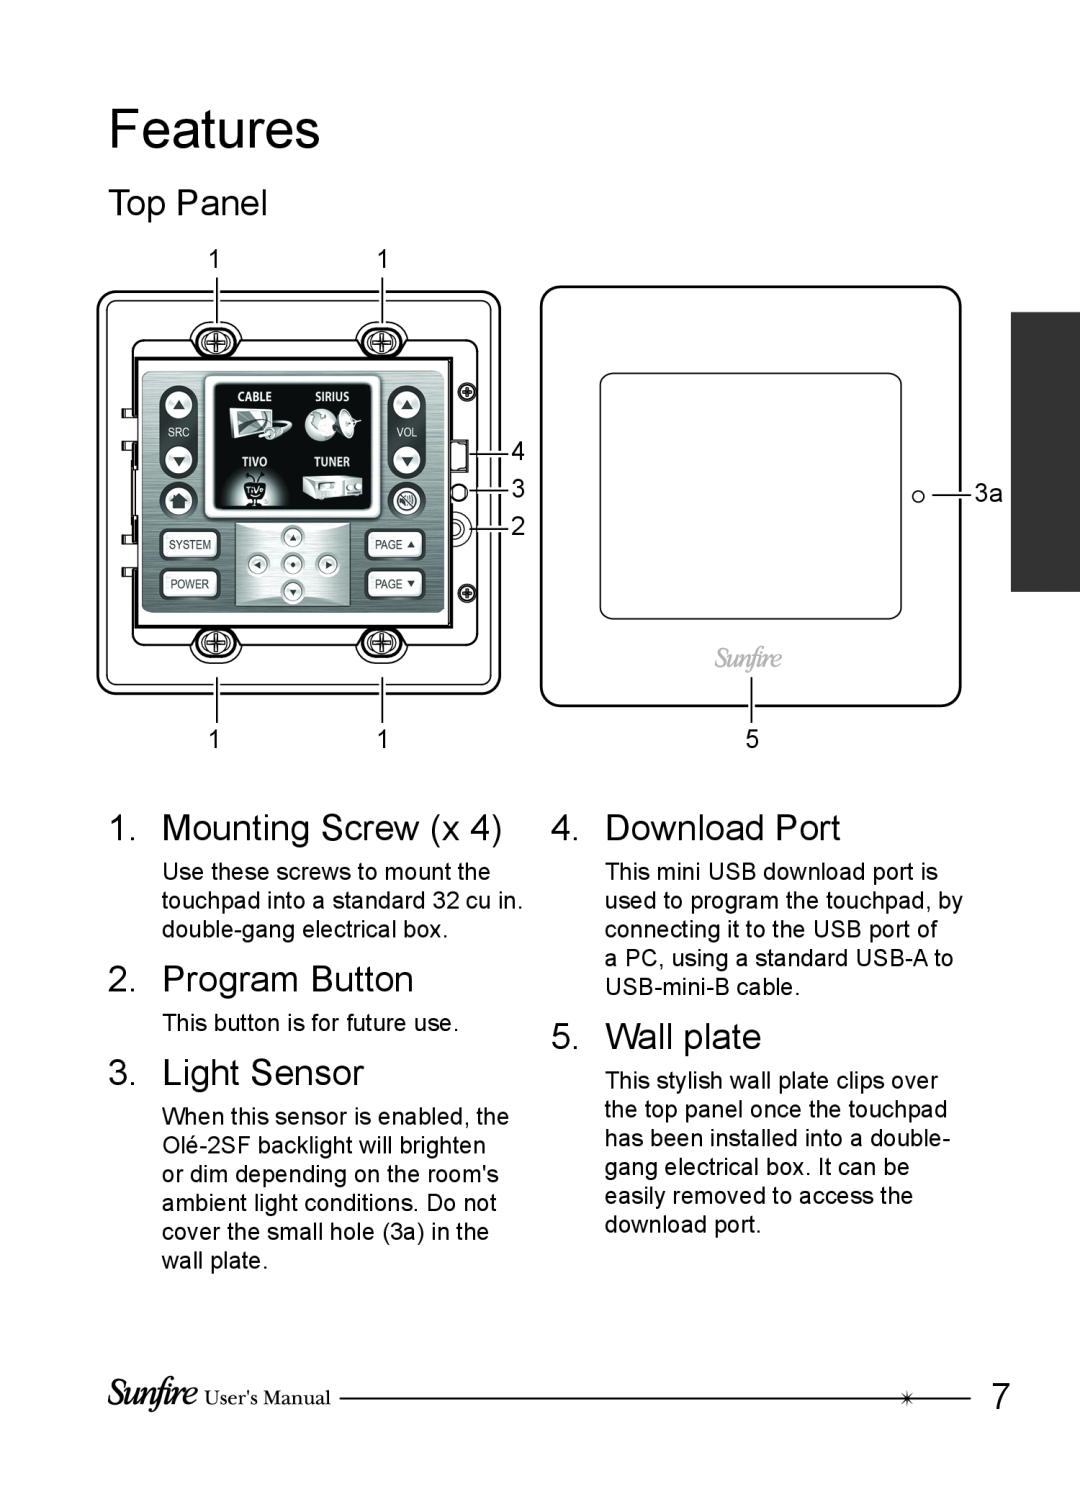 Sunfire OLE-2SF Features, Top Panel, Mounting Screw, Program Button, Light Sensor, Download Port, Wall plate, 11 4 3 3a 